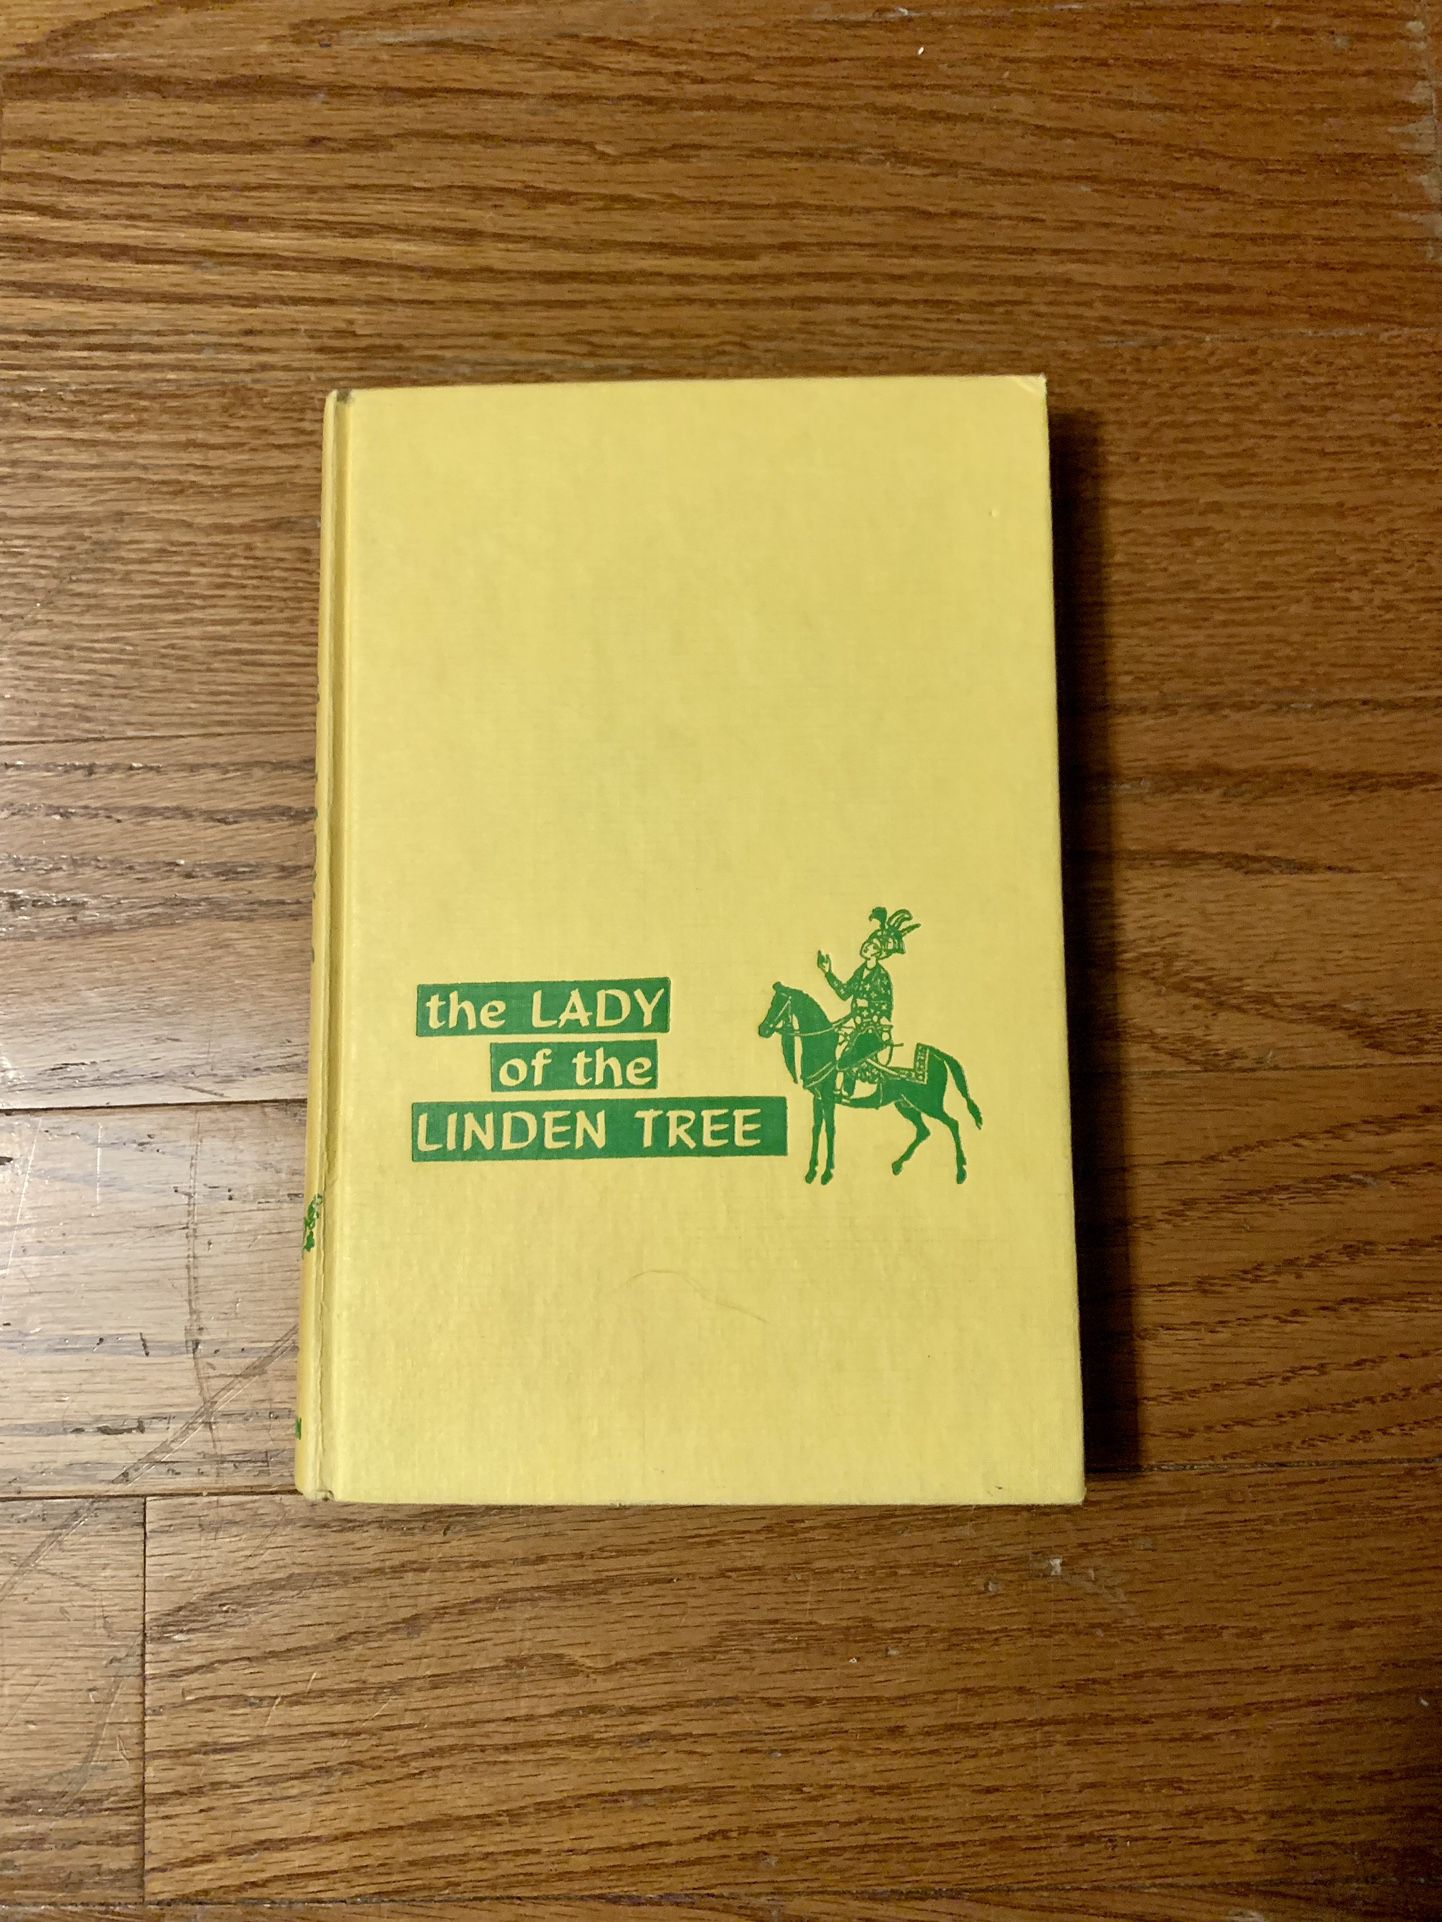 The Lady of the Linden Tree by Barbara Leoni Picard '62 Vtg Oxford Edition Book